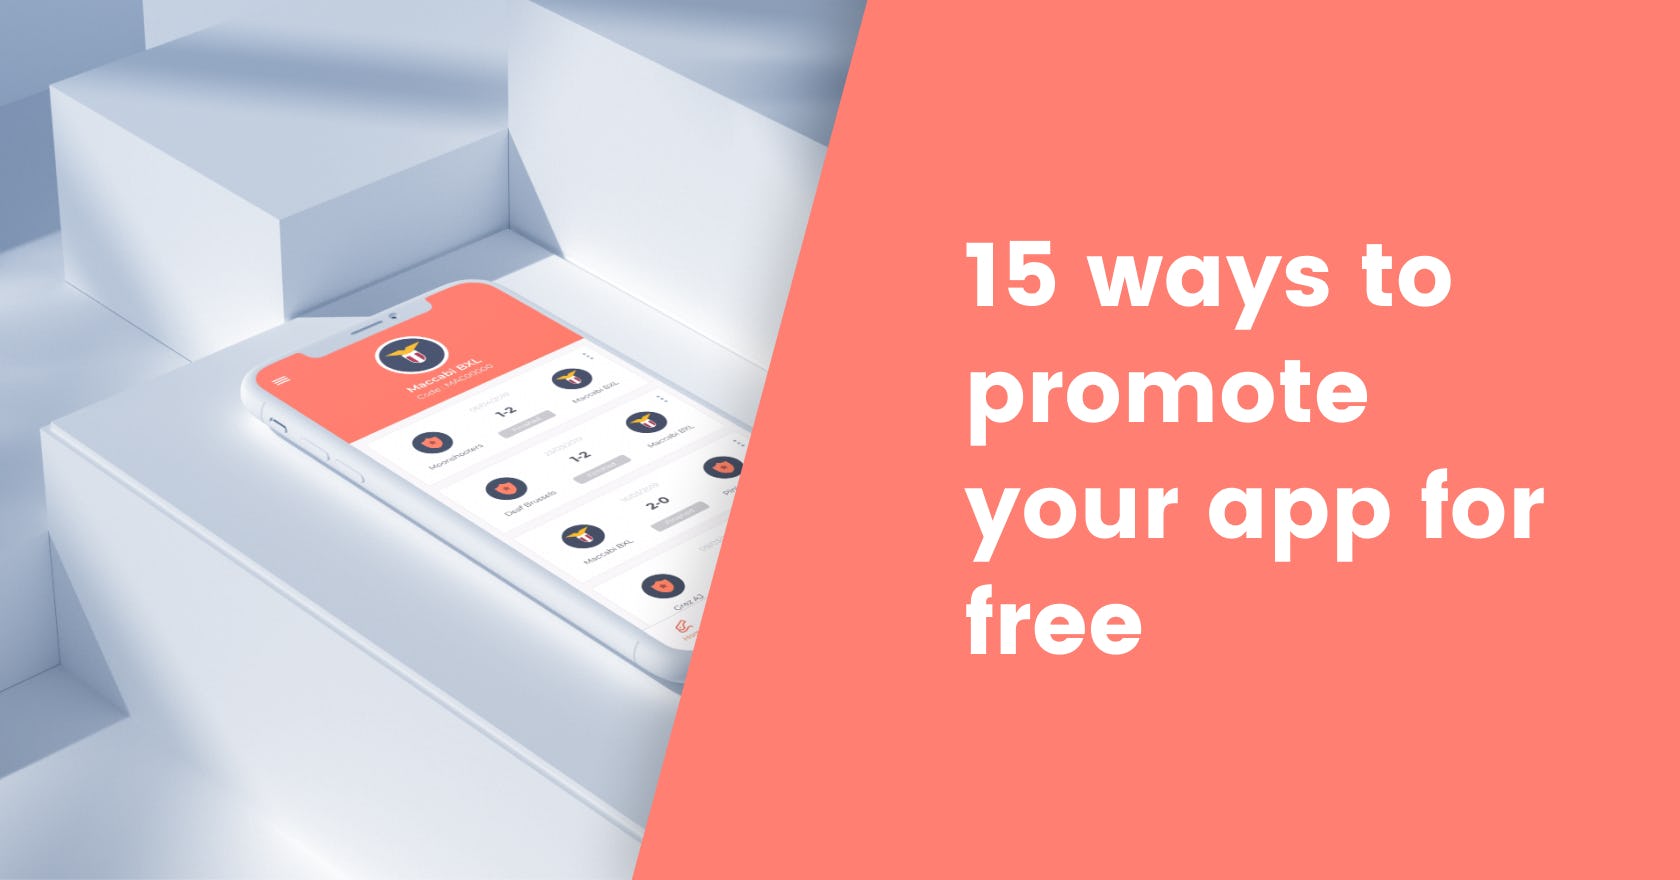 Nightborn - 15 ways to promote your app for free